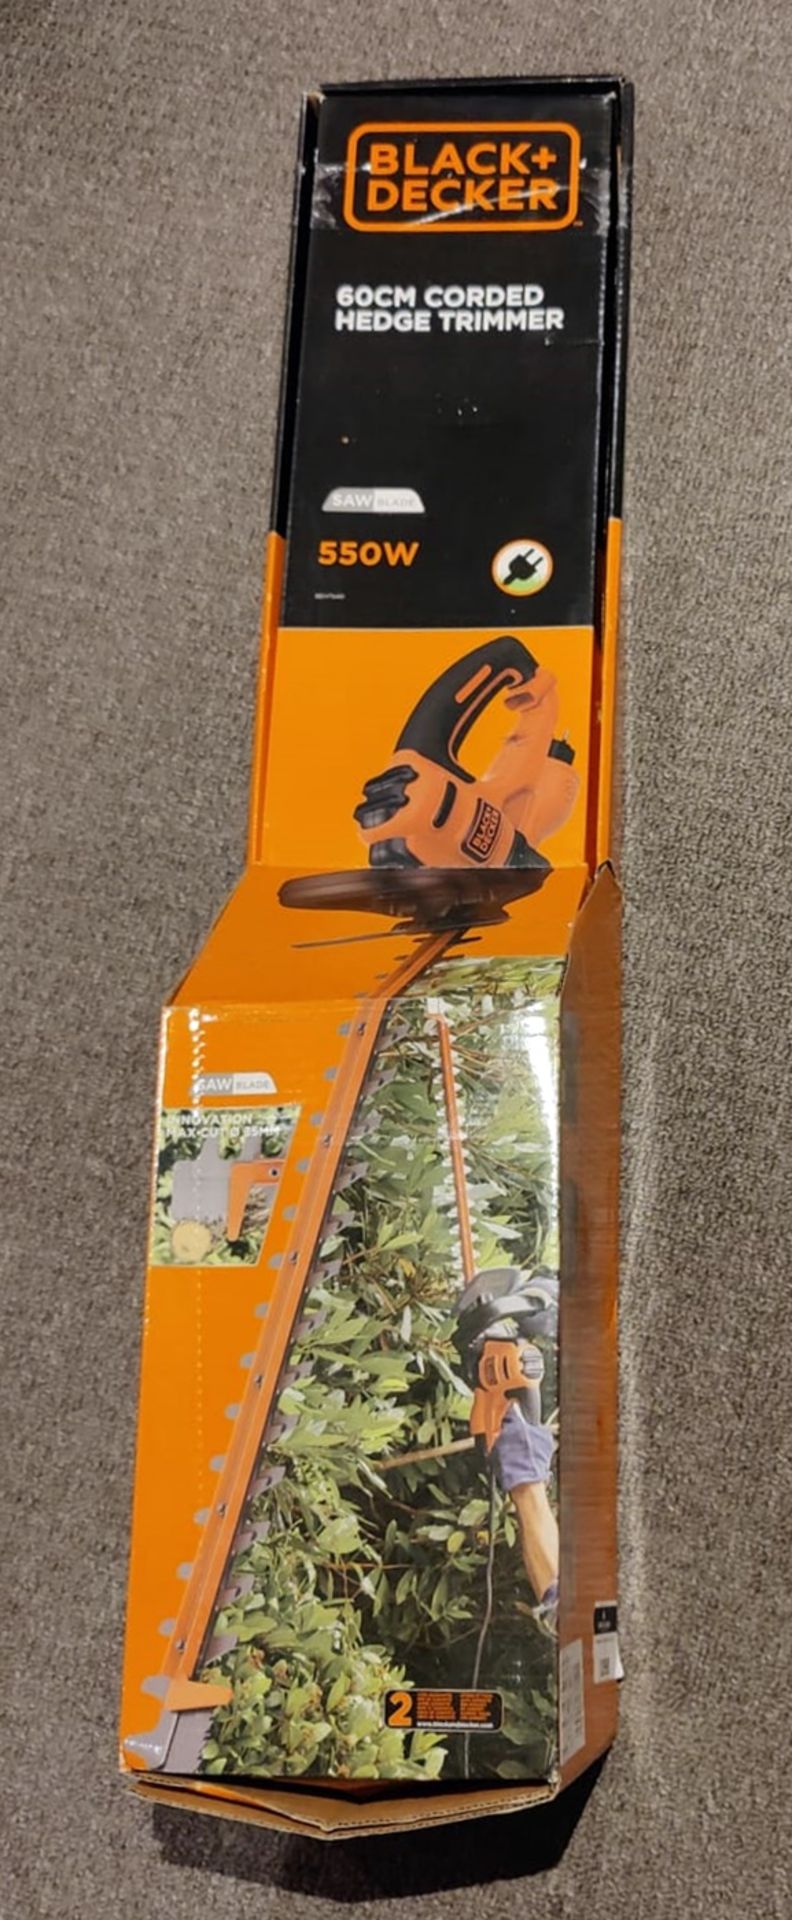 1 x Black & Decker 60cm Corded Hedge Trimmer - 550W - New and Boxed